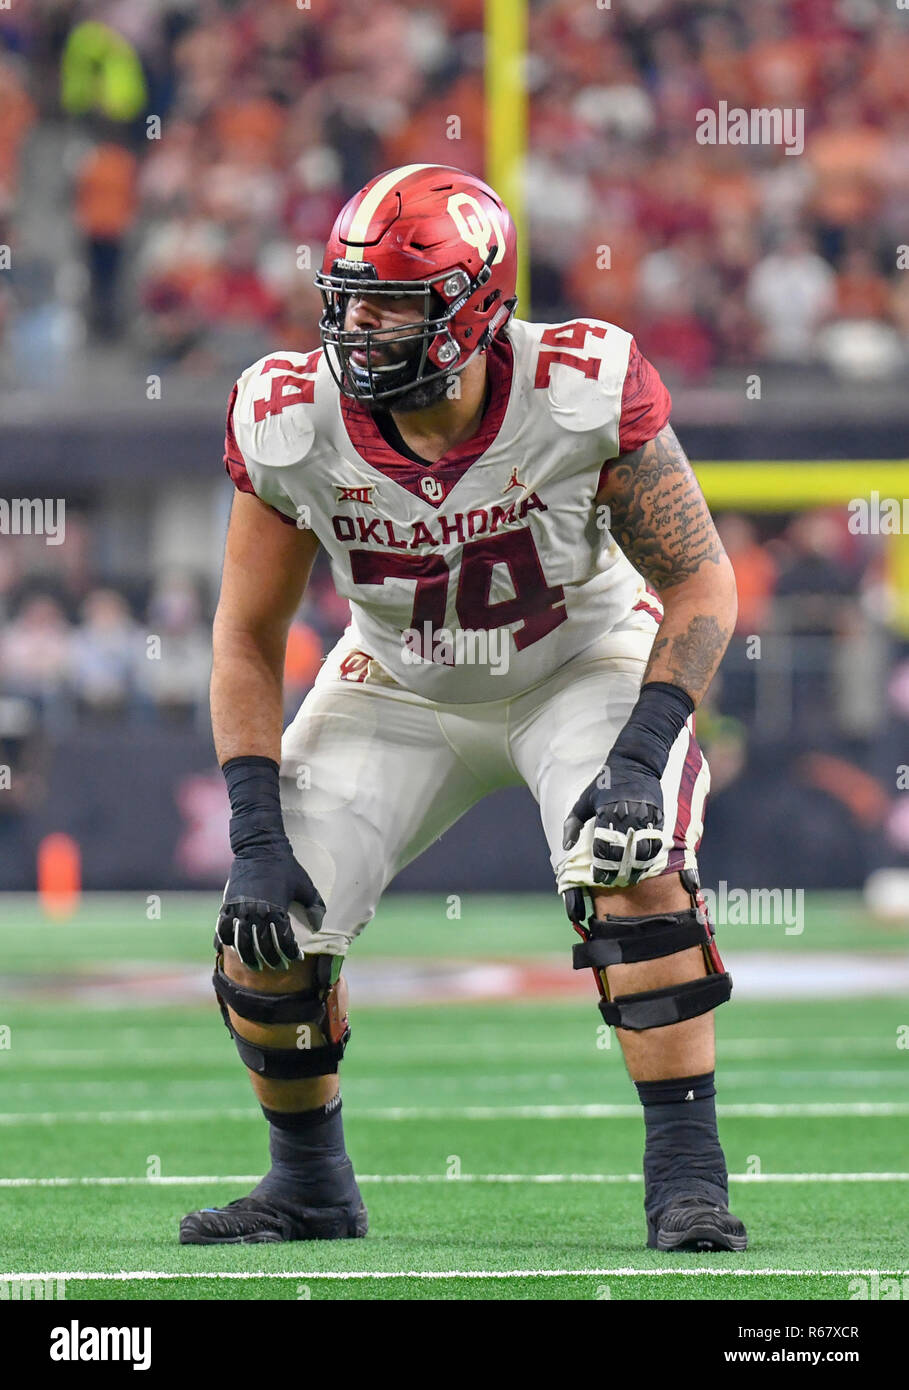 december-01-2018-oklahoma-sooners-offensive-lineman-cody-ford-74-in-the-ncaa-big-12-championship-football-game-between-the-university-of-texas-longhorns-and-the-university-of-oklahoma-sooners-at-att-stadium-in-arlington-tx-oklahoma-defeated-texas-39-27-albert-penacsm-R67XCR.jpg